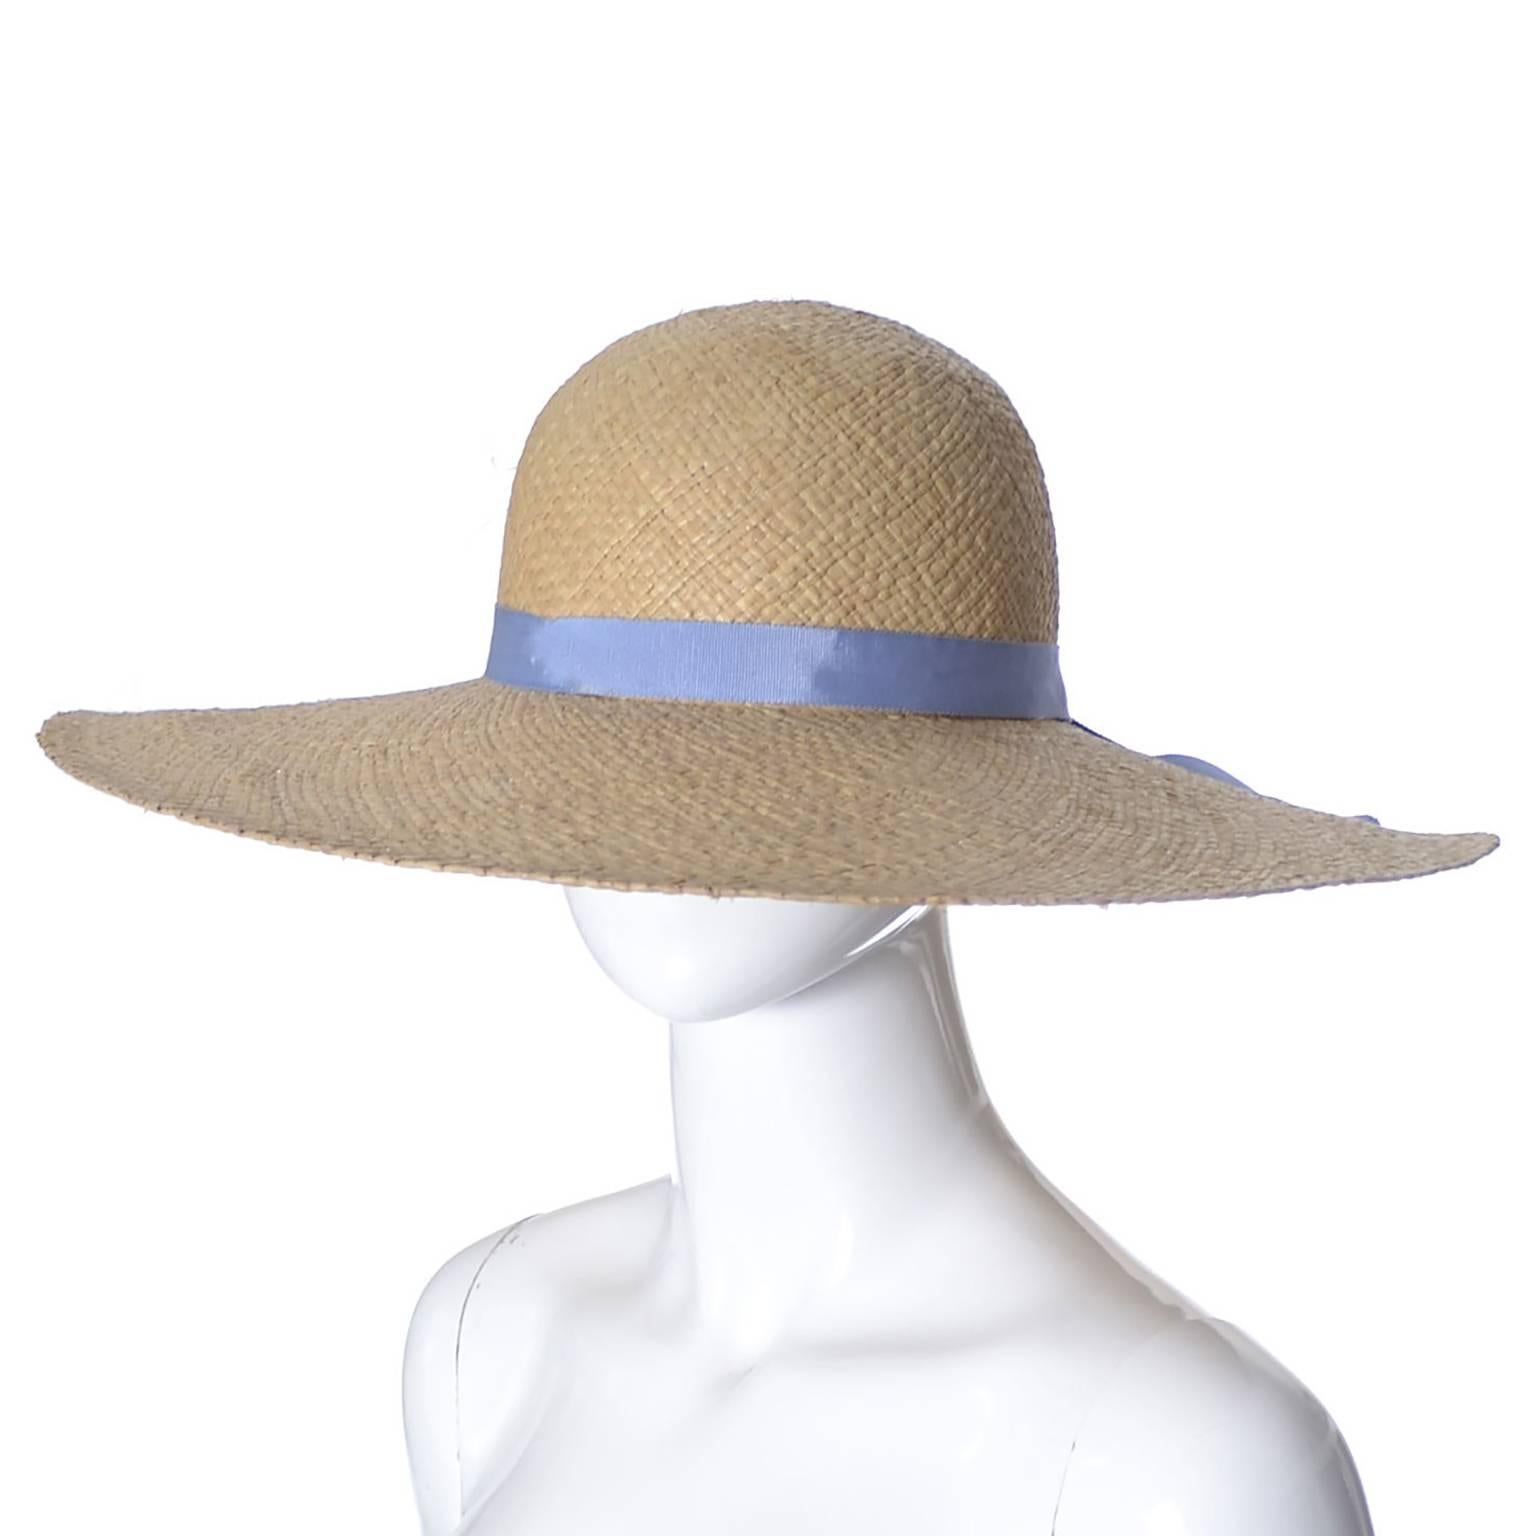 This is a classic late 1970's wide brimmed vintage straw hat from Ralph Lauren.  This natural straw vintage hat has a pretty sky blue grosgrain ribbon and a wide 5 and 1/2 inch brim.  This hat came from an estate of quite a few beautiful Ralph